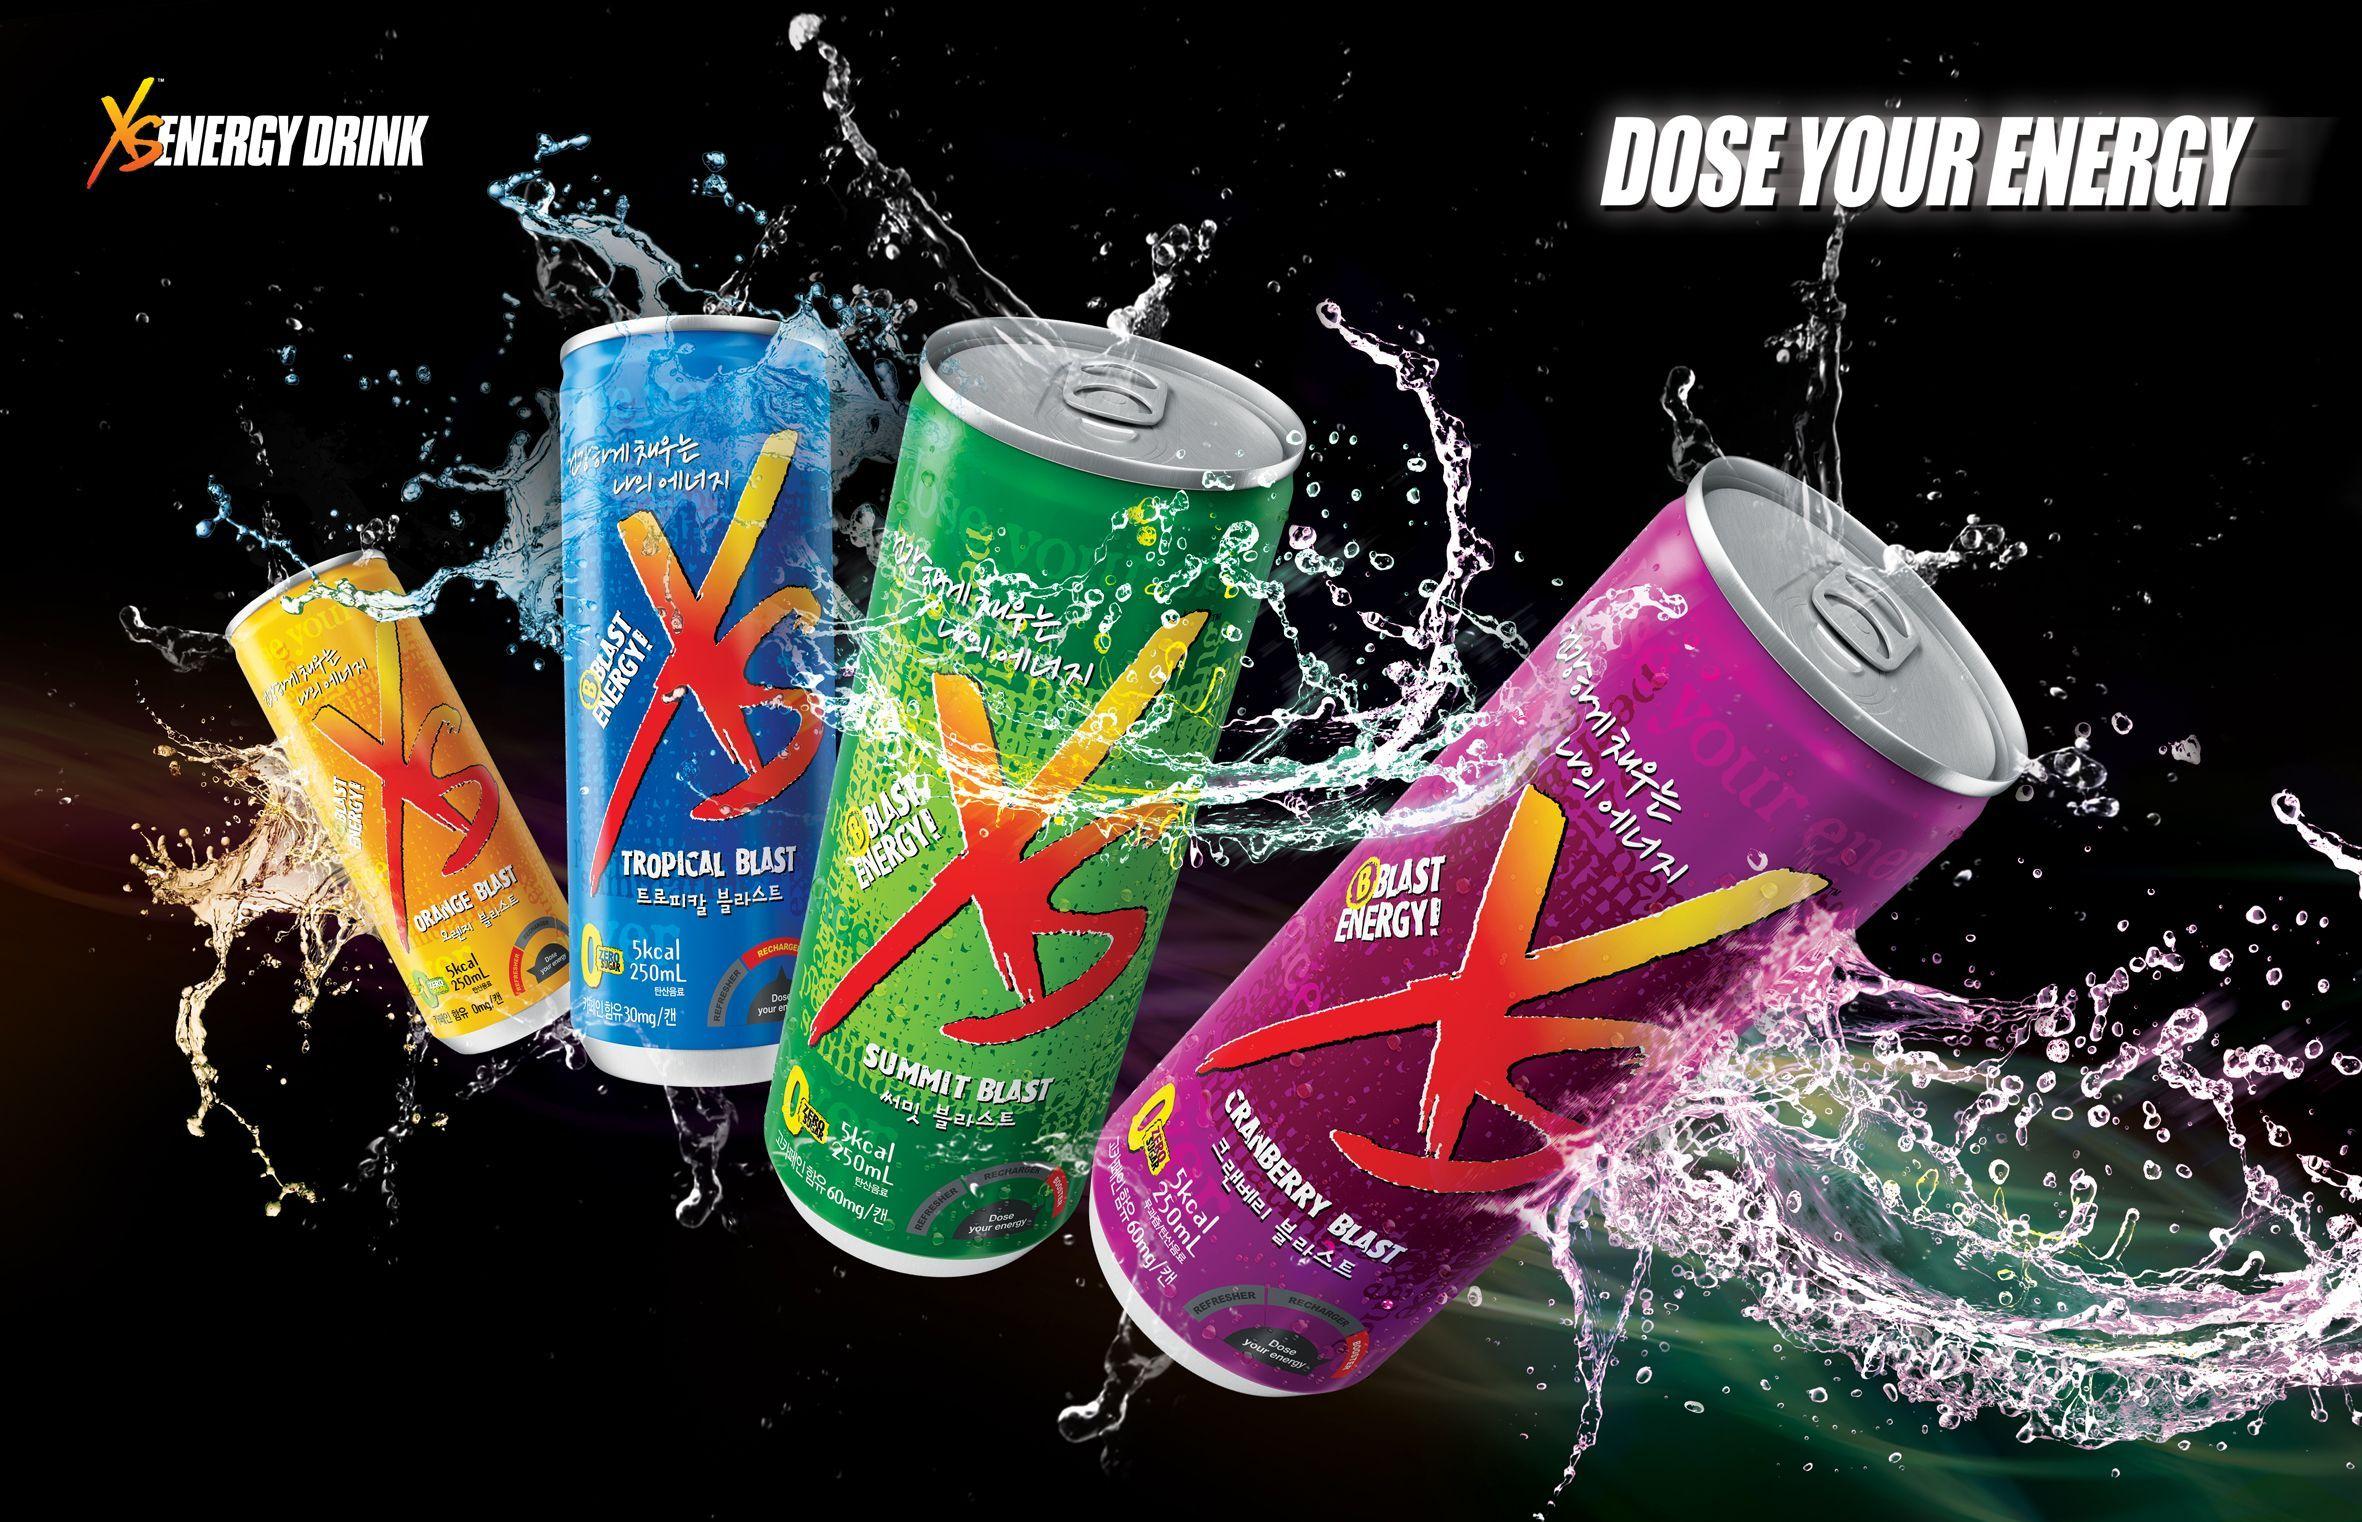 XS Energy Drink Logo - XS Energy Drink AD Design by gtl communication. Xs Pics